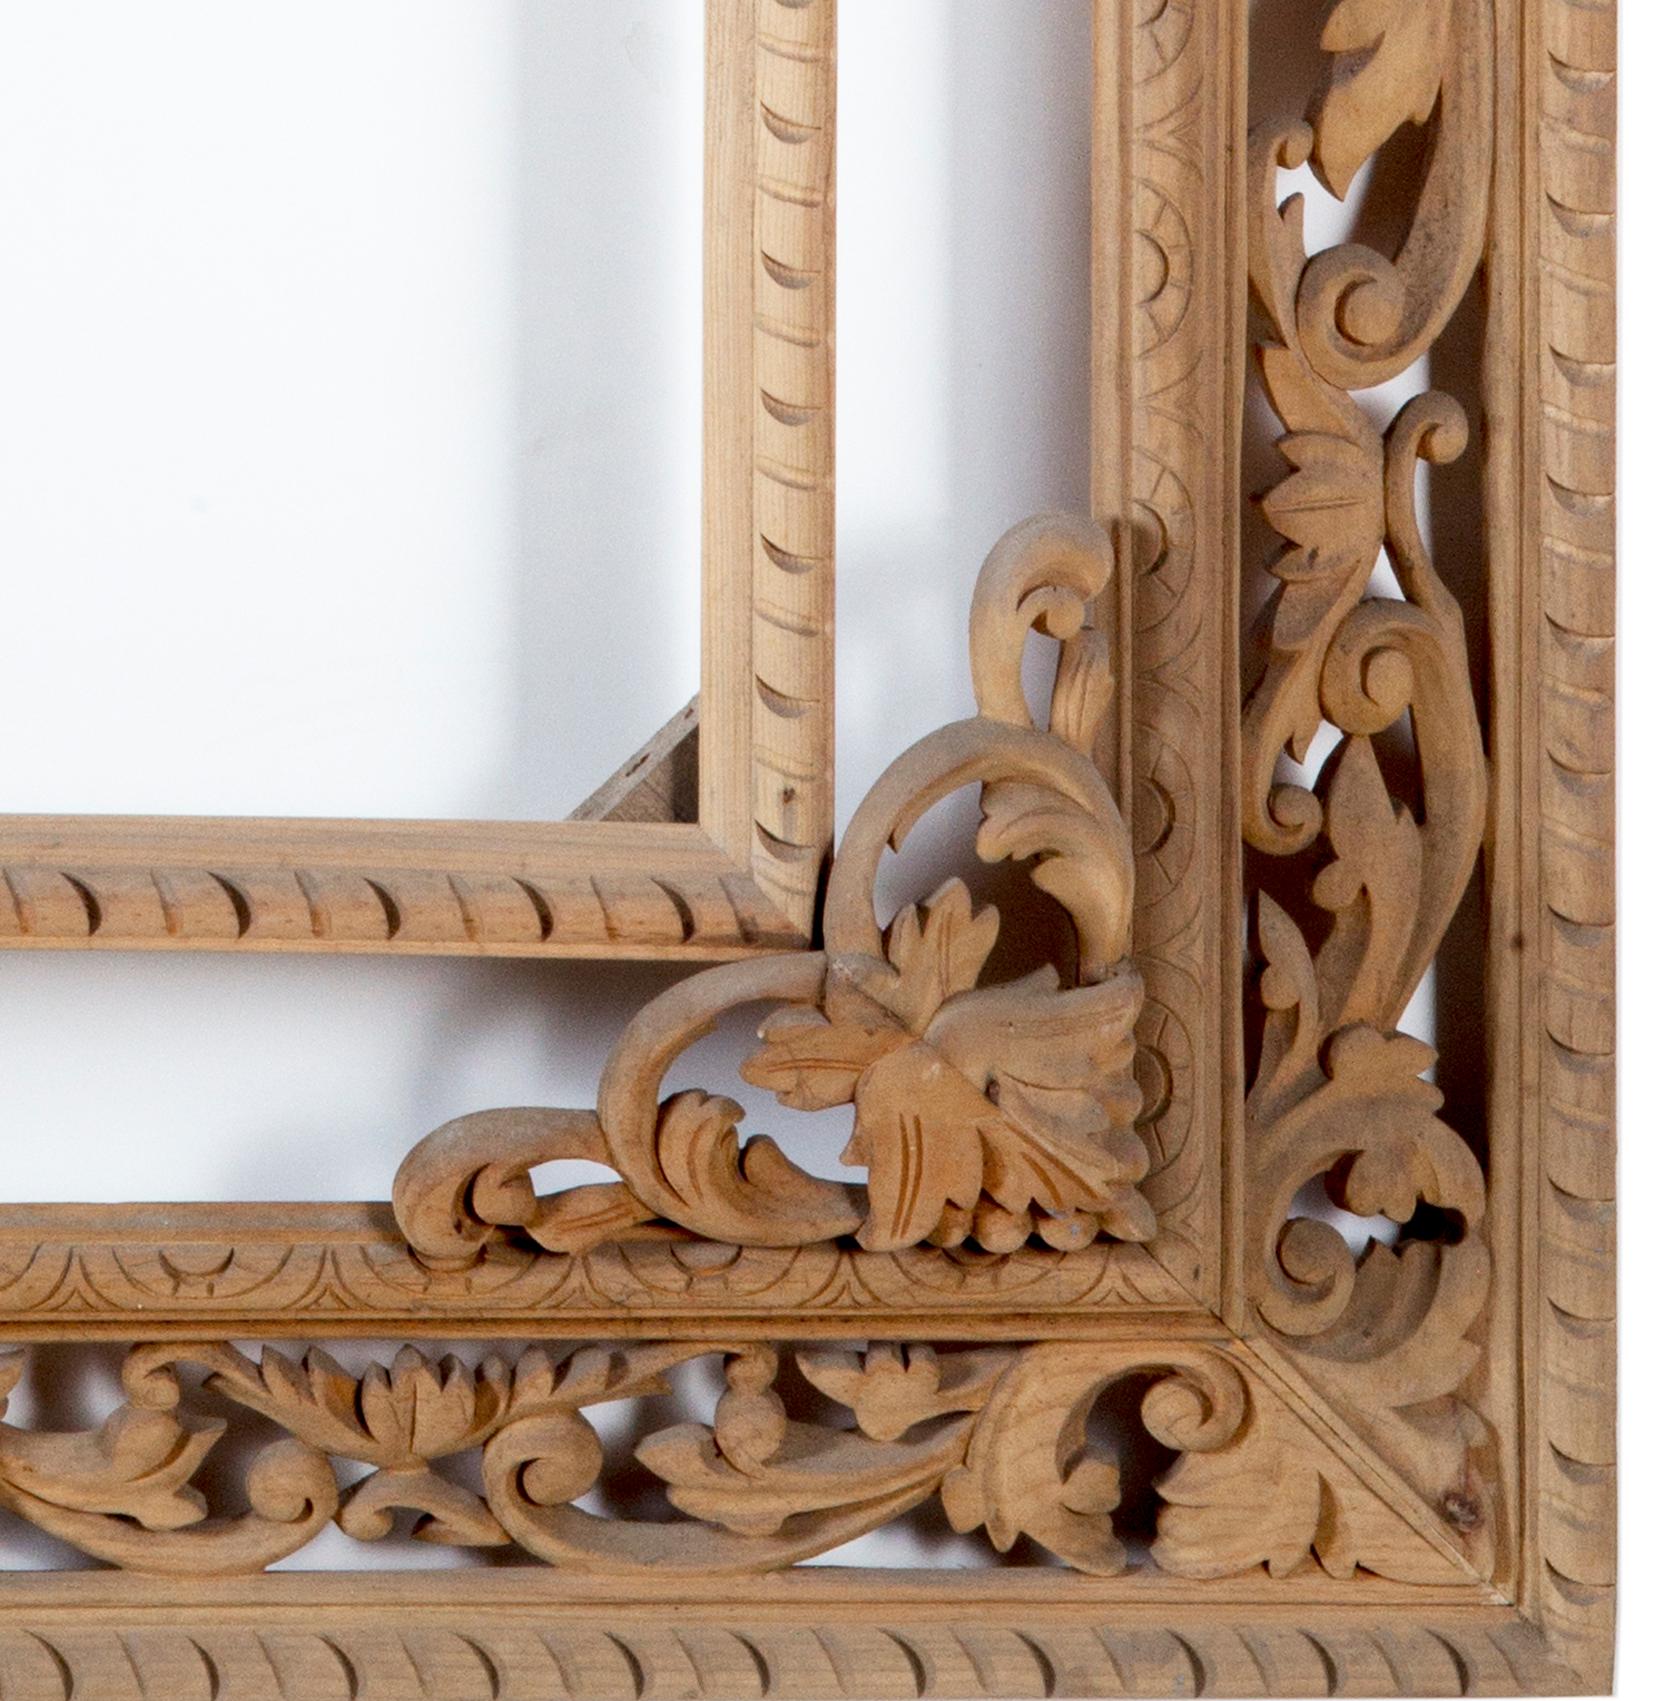 Hand-carved regency pine frame
with pierced work panels and rampant lion cresting.
Overall size: H 60